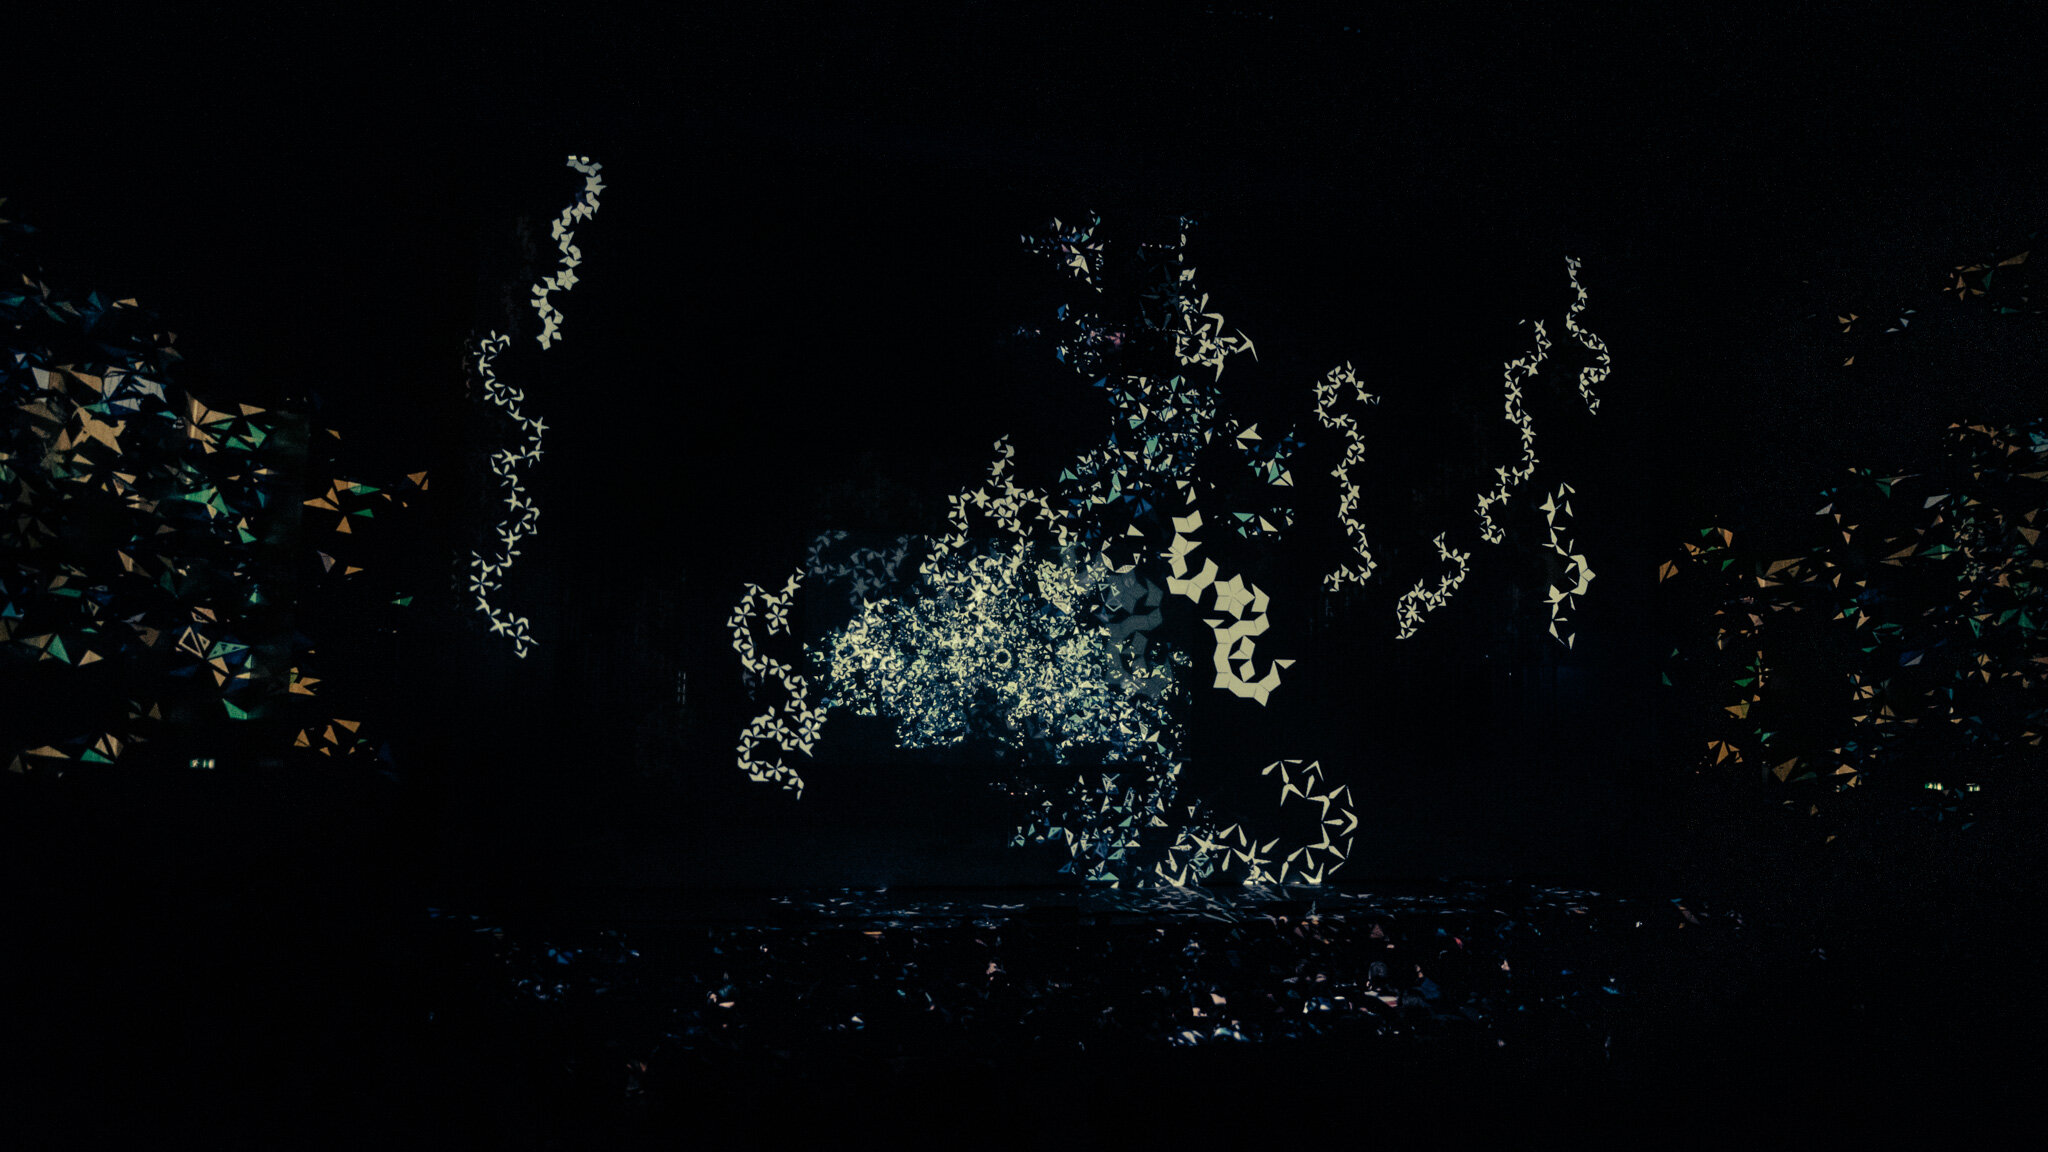  Visuals for Max Cooper’s audio visual album Yearning for the Infinite  Track: Penrose  photo by Michal Augustini 